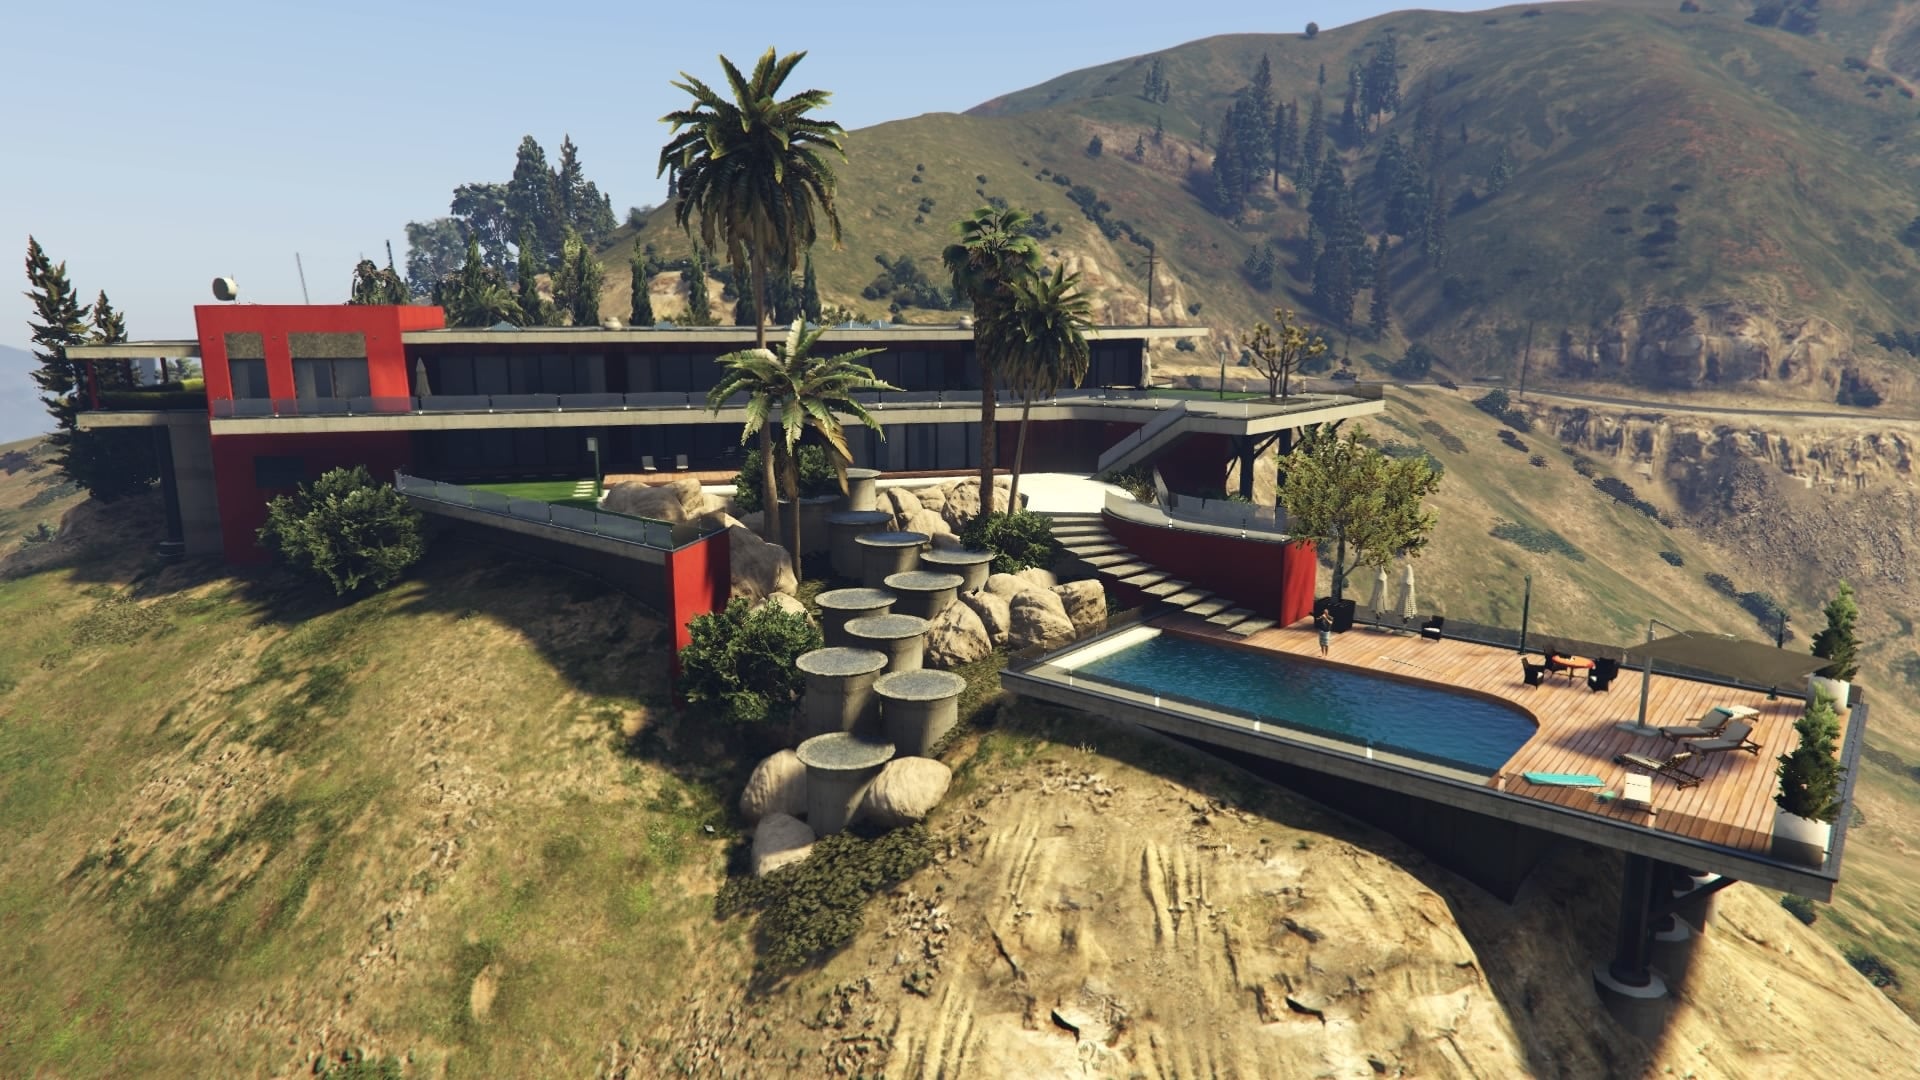 Next to the Playboy Mansion, Devon Weston's mansion is highly sought-after among GTA Online players. After the end of GTA 5's single player campaign, it would even theoretically be free